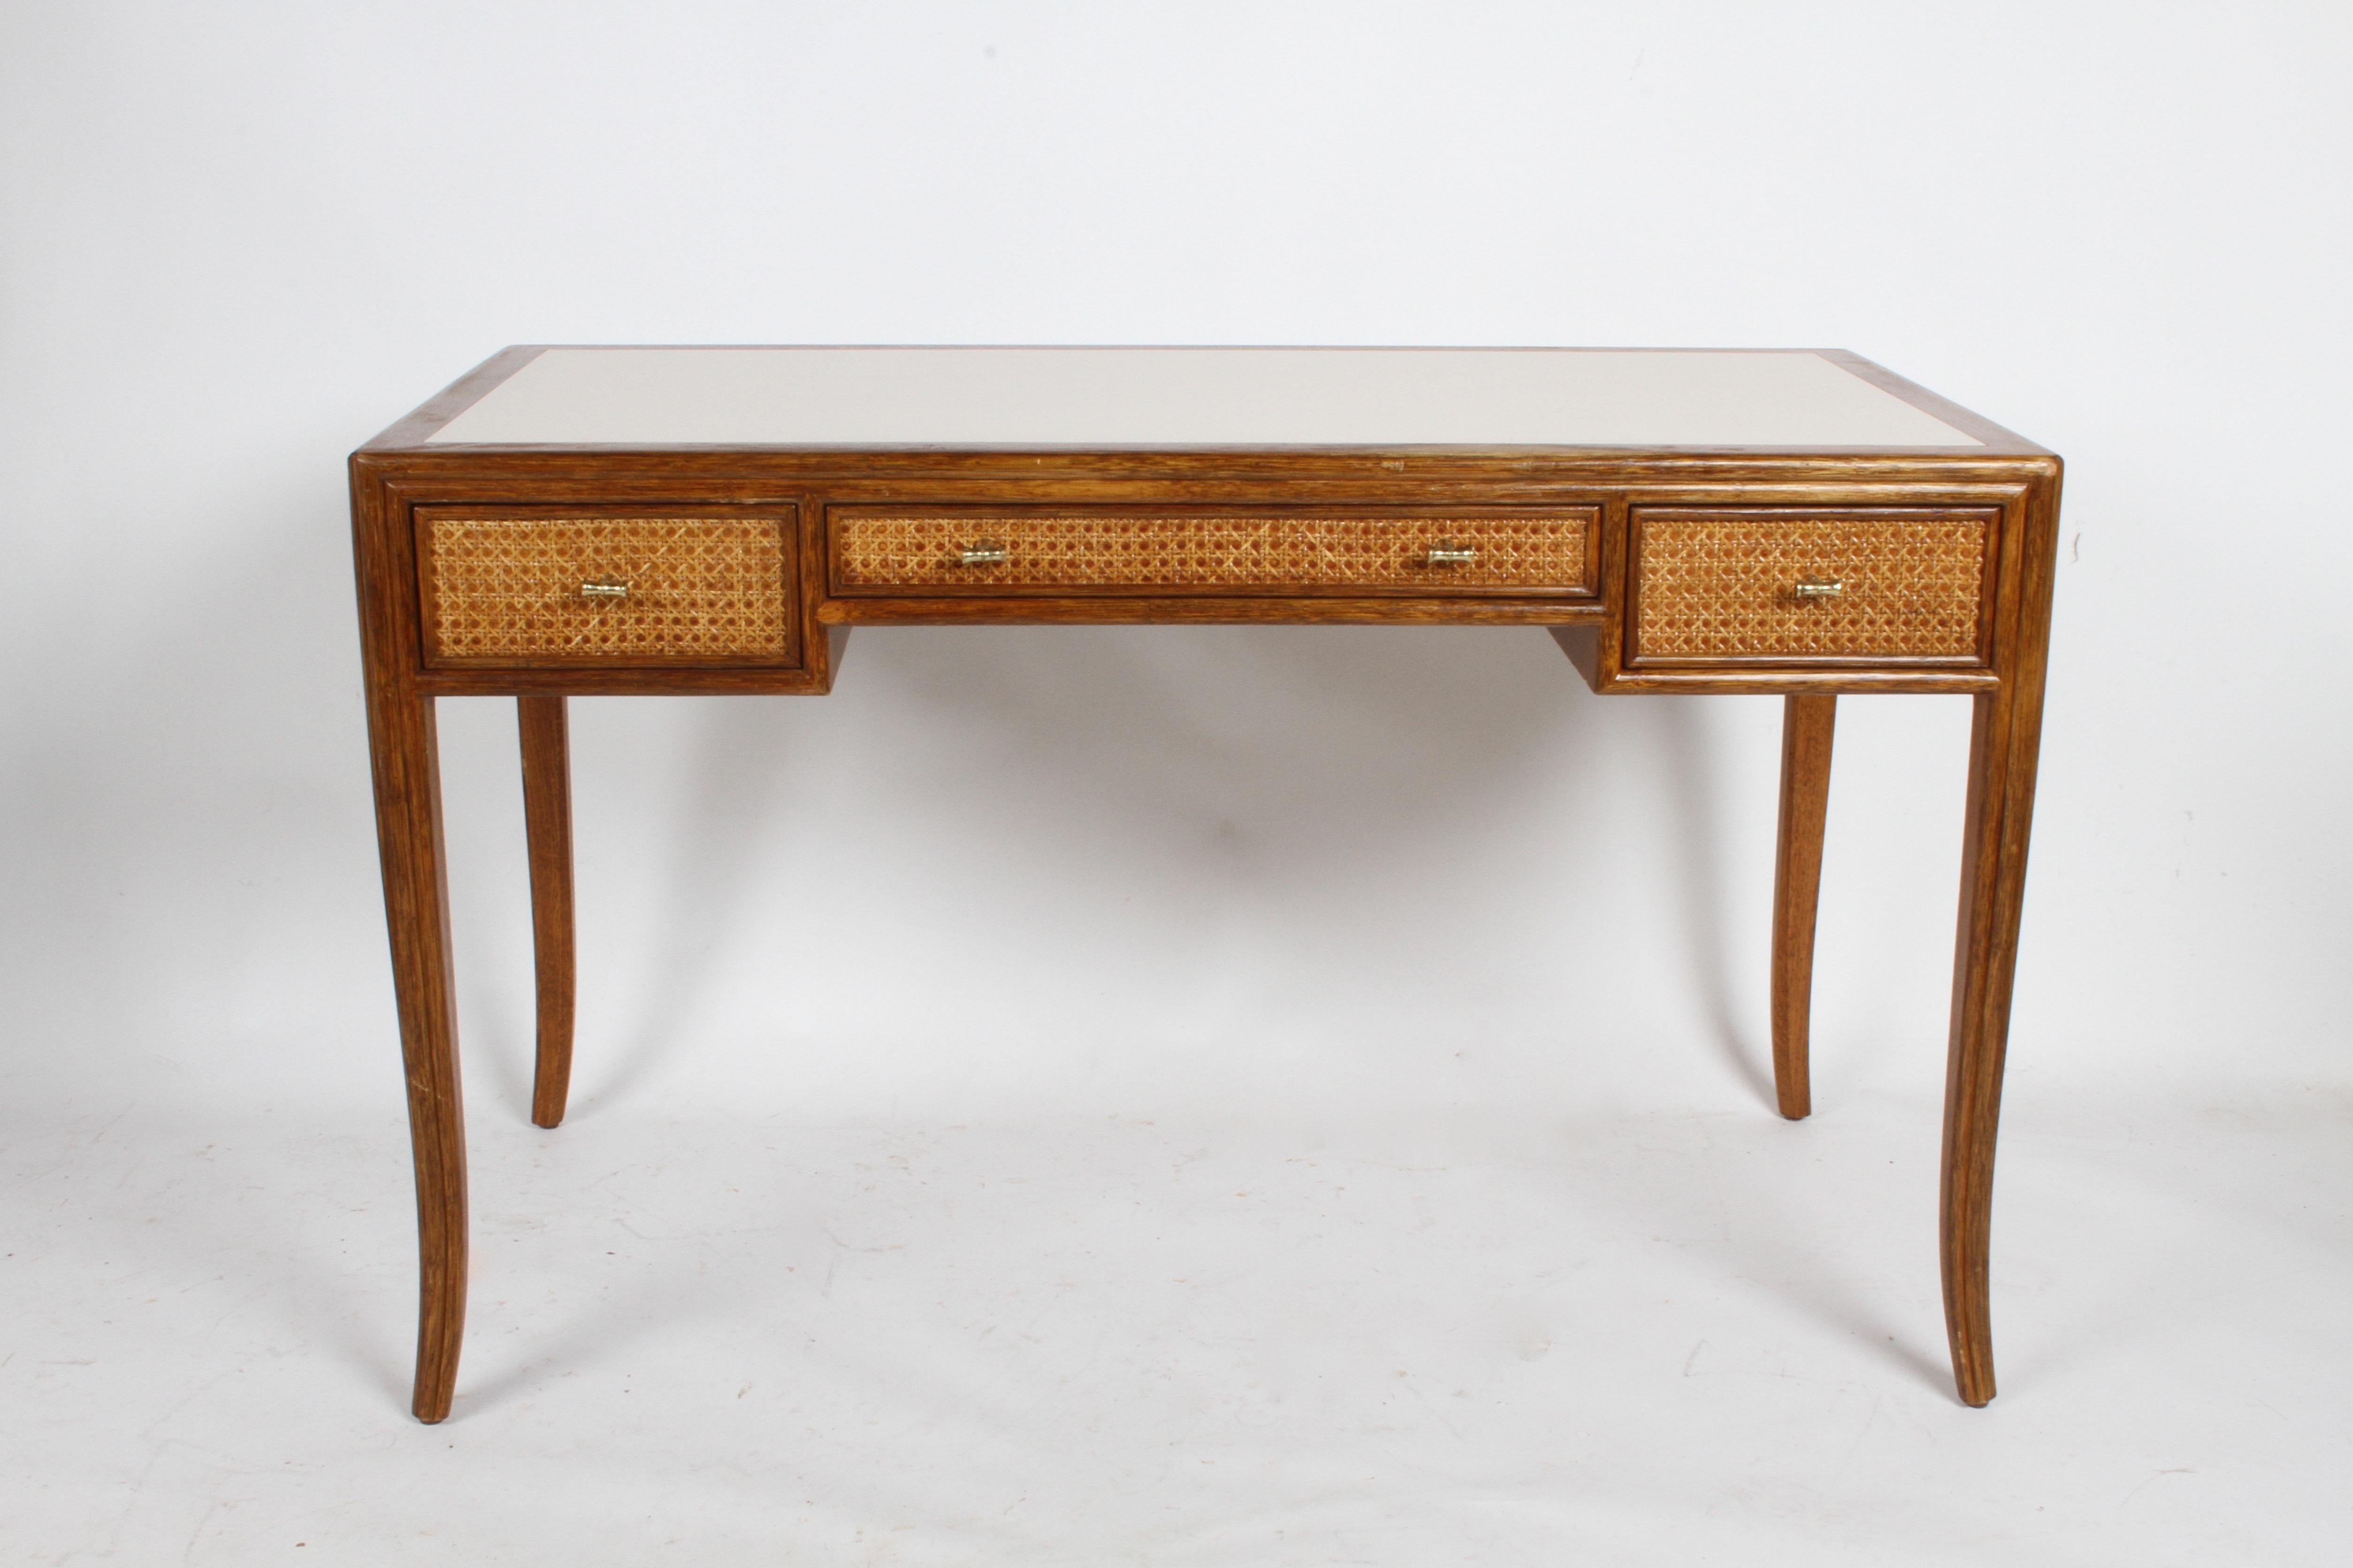 1970s McGuire furniture of San Francisco designed desk with splayed legs, caned panels and faux brass pulls. This elegant design, reminds me of T.H. Robsjohn-Gibbings designs for Widdicomb and Baker. Rattan frame with crème laminate top, frame to be